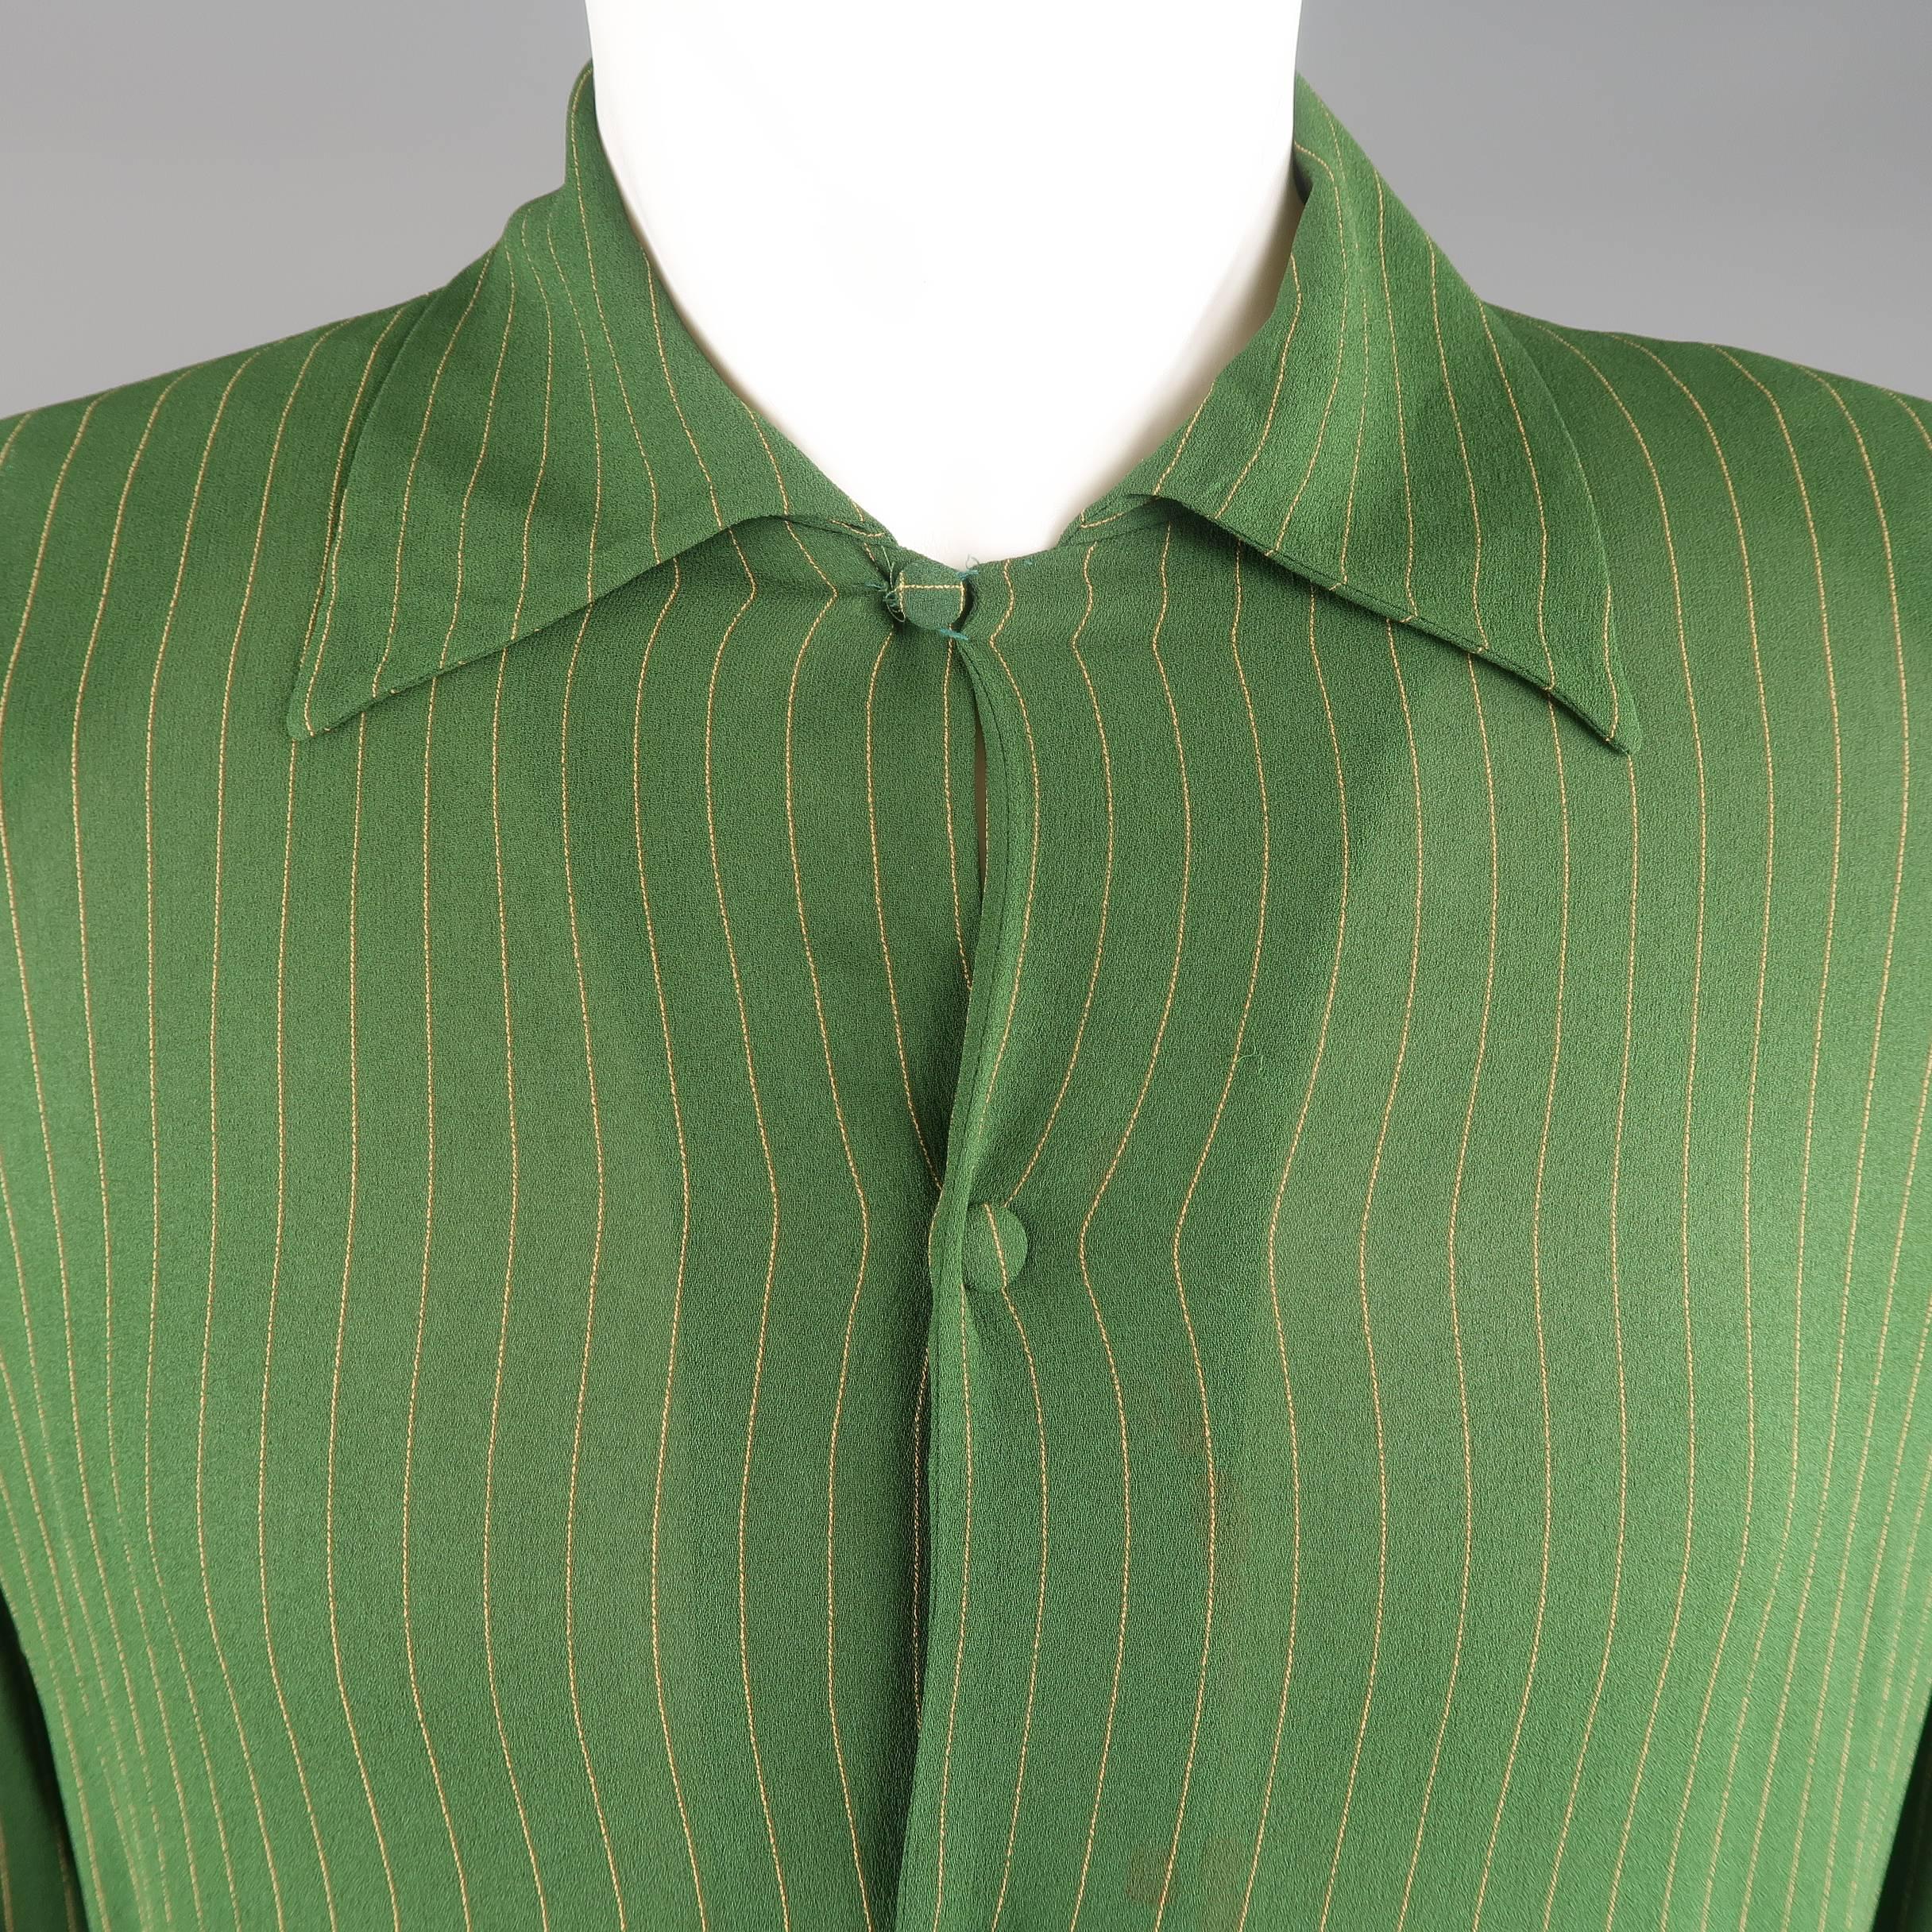 Vintage JEAN PAUL GAULTIER HOMME shirt comes in a green and golden yellow pinstripe crepe and features a pointed collar, covered button snap up front, padded shoulders, French cuffs with button links, and signature back tab detail. Minor wear